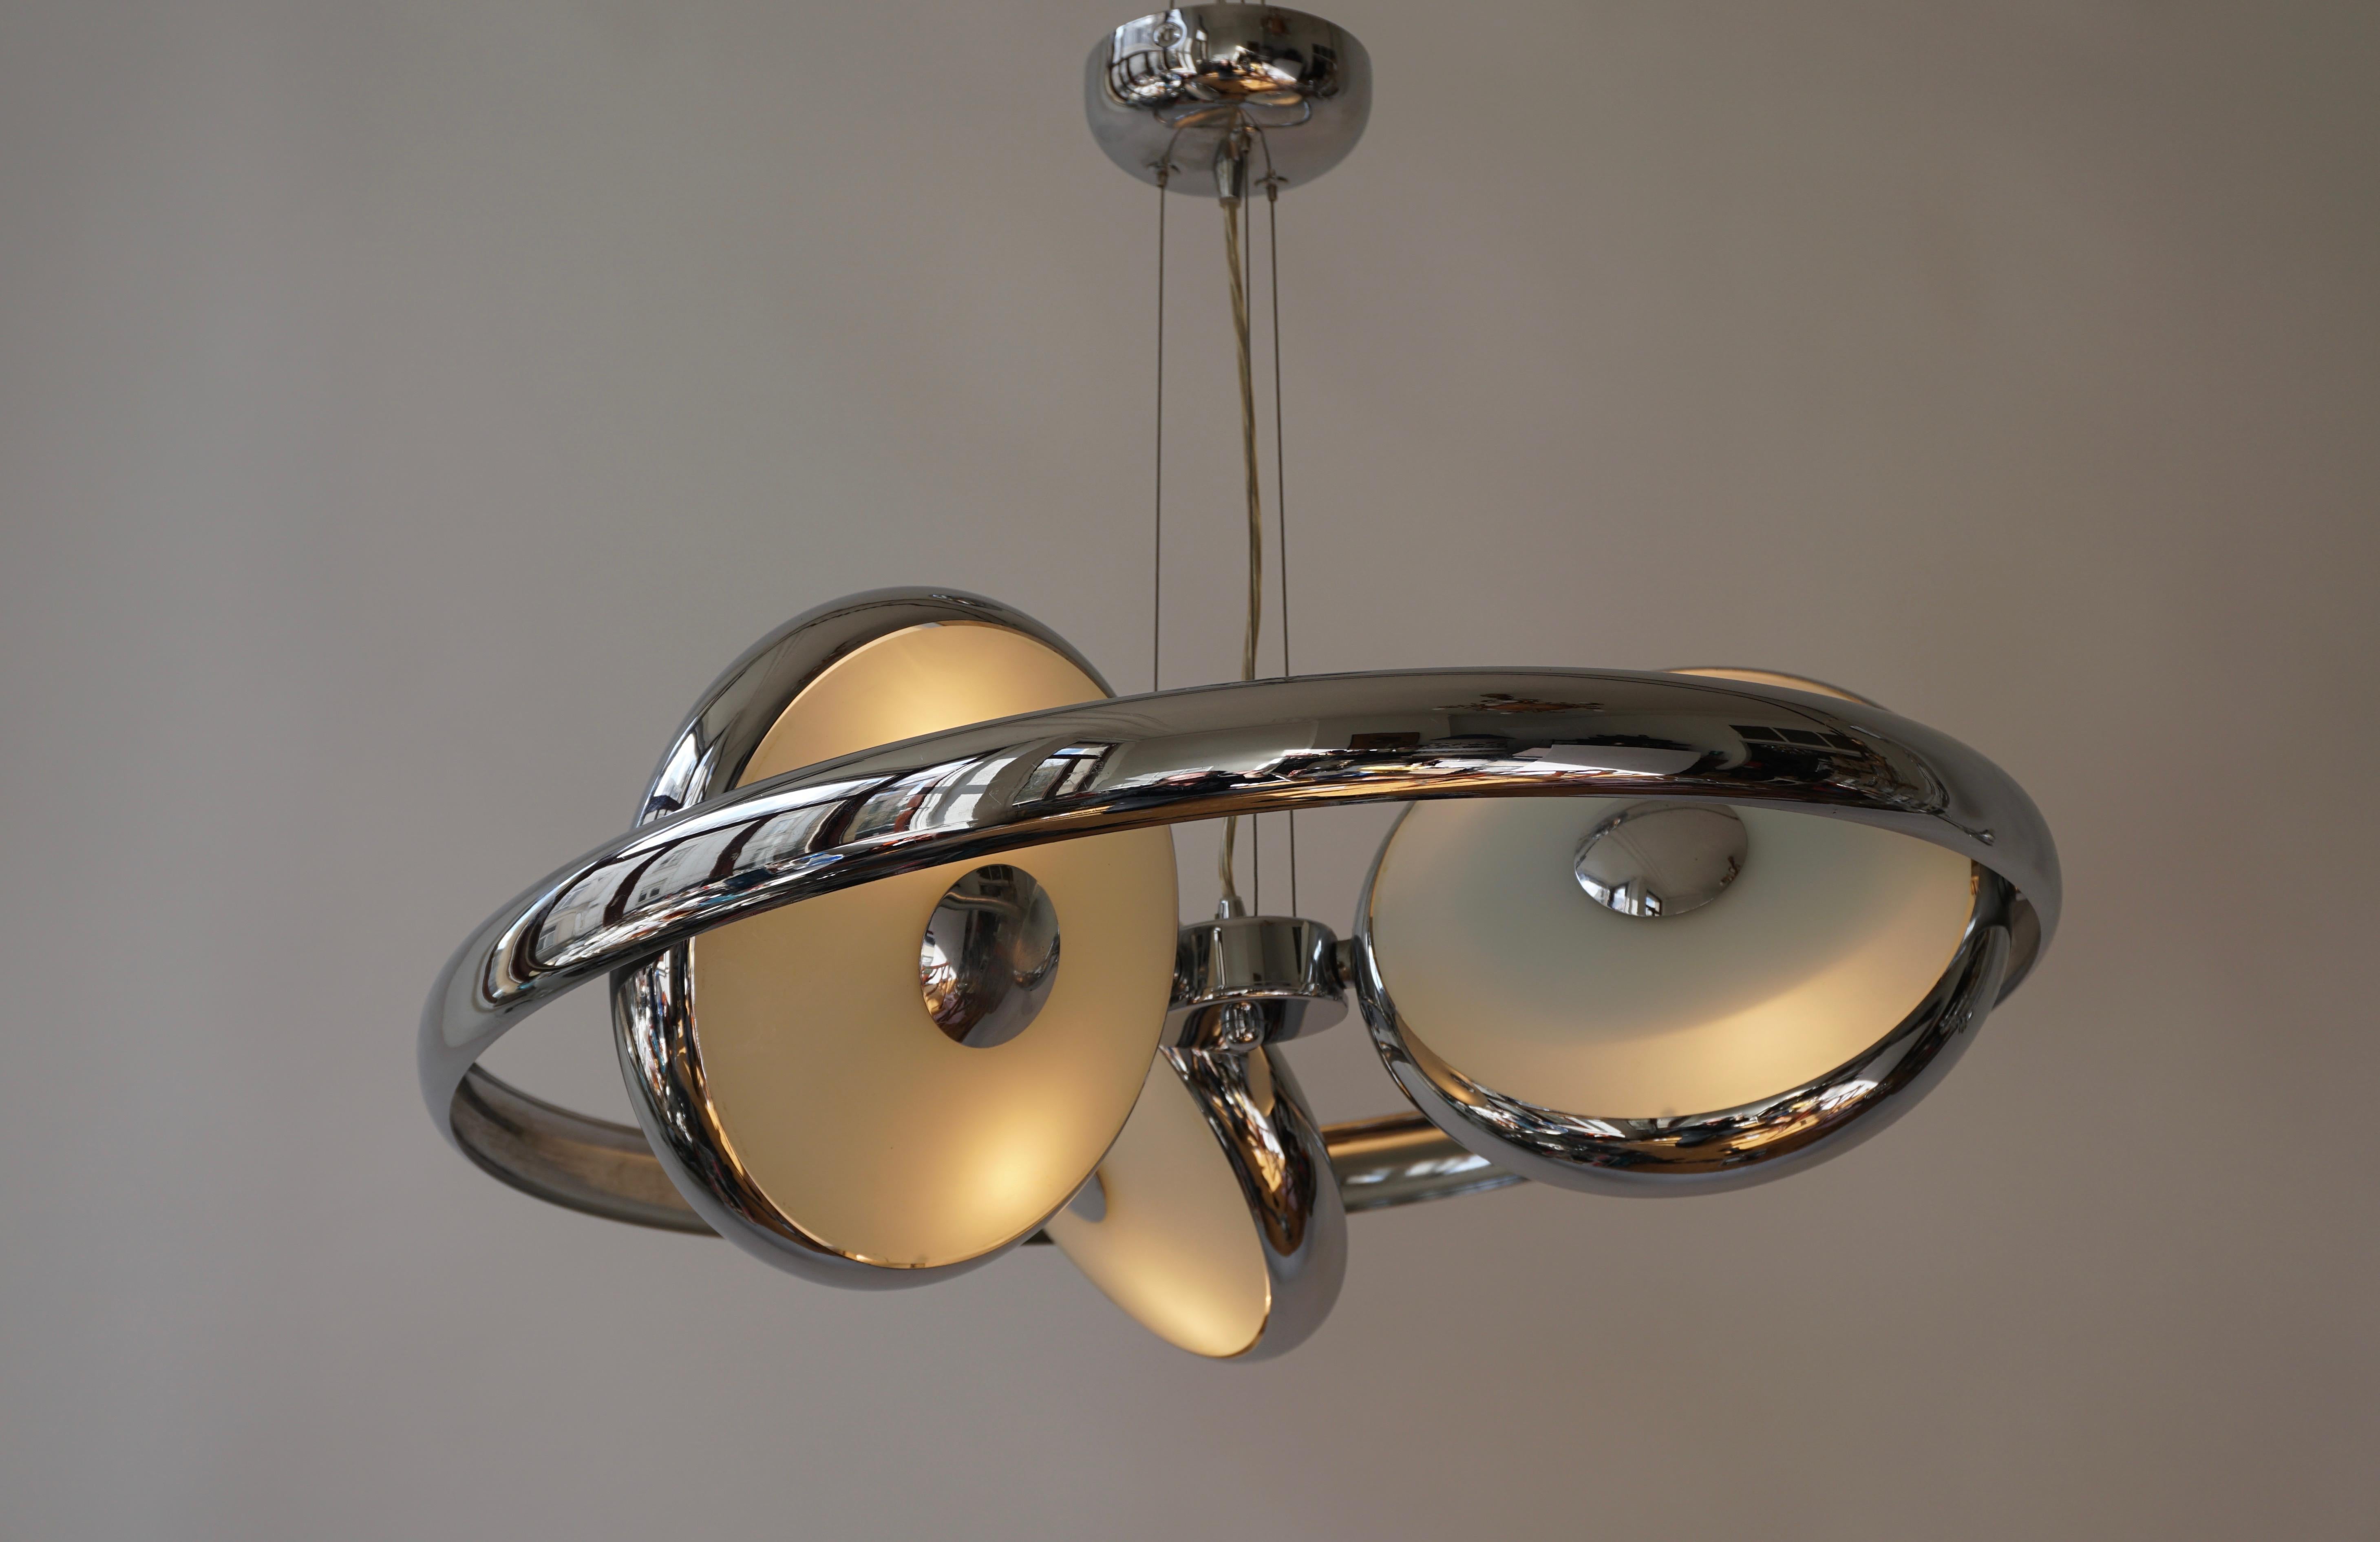 One large adjustable ufo chandeliers in glass and chrome.
Takes six E 14 size bulbs, up to 40 watts each for 240 watts total. 

Two pieces have been sold and one is still available.

Measures: Diameter 58 cm.
Height fixture 9 cm.
Total height 125 cm.